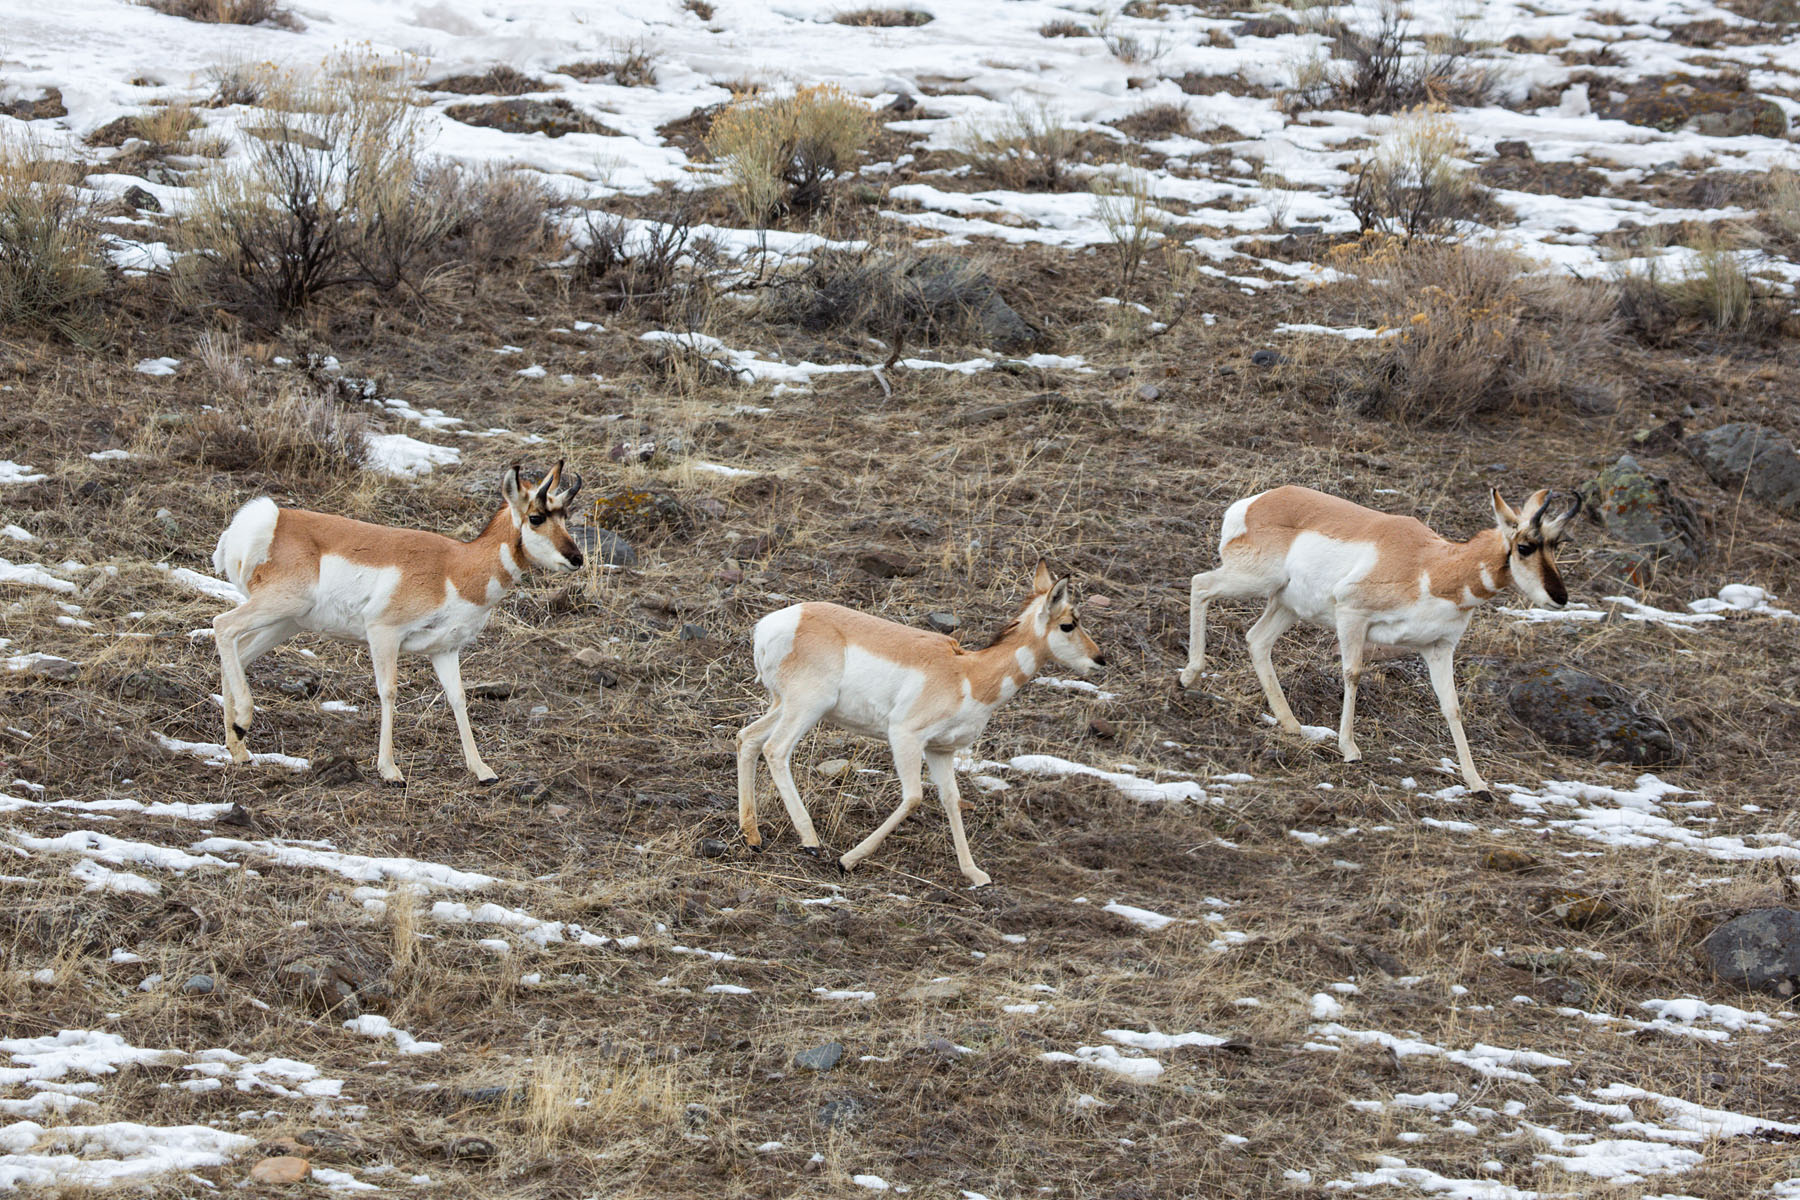 Pronghorn near the north entrance, Yellowstone, February 2022.  Click for next photo.